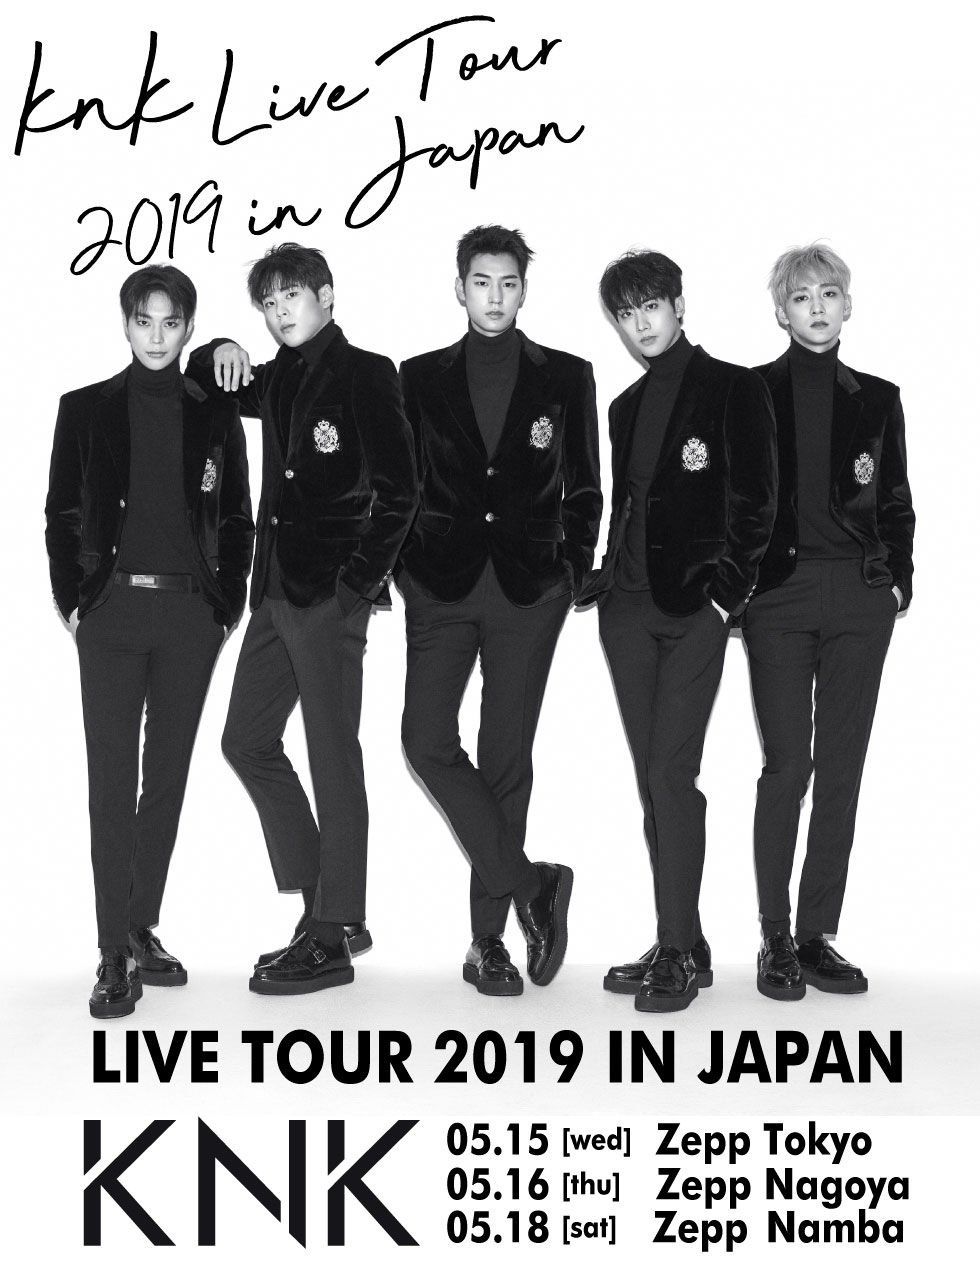 KNK LIVE TOUR 2019 IN JAPAN